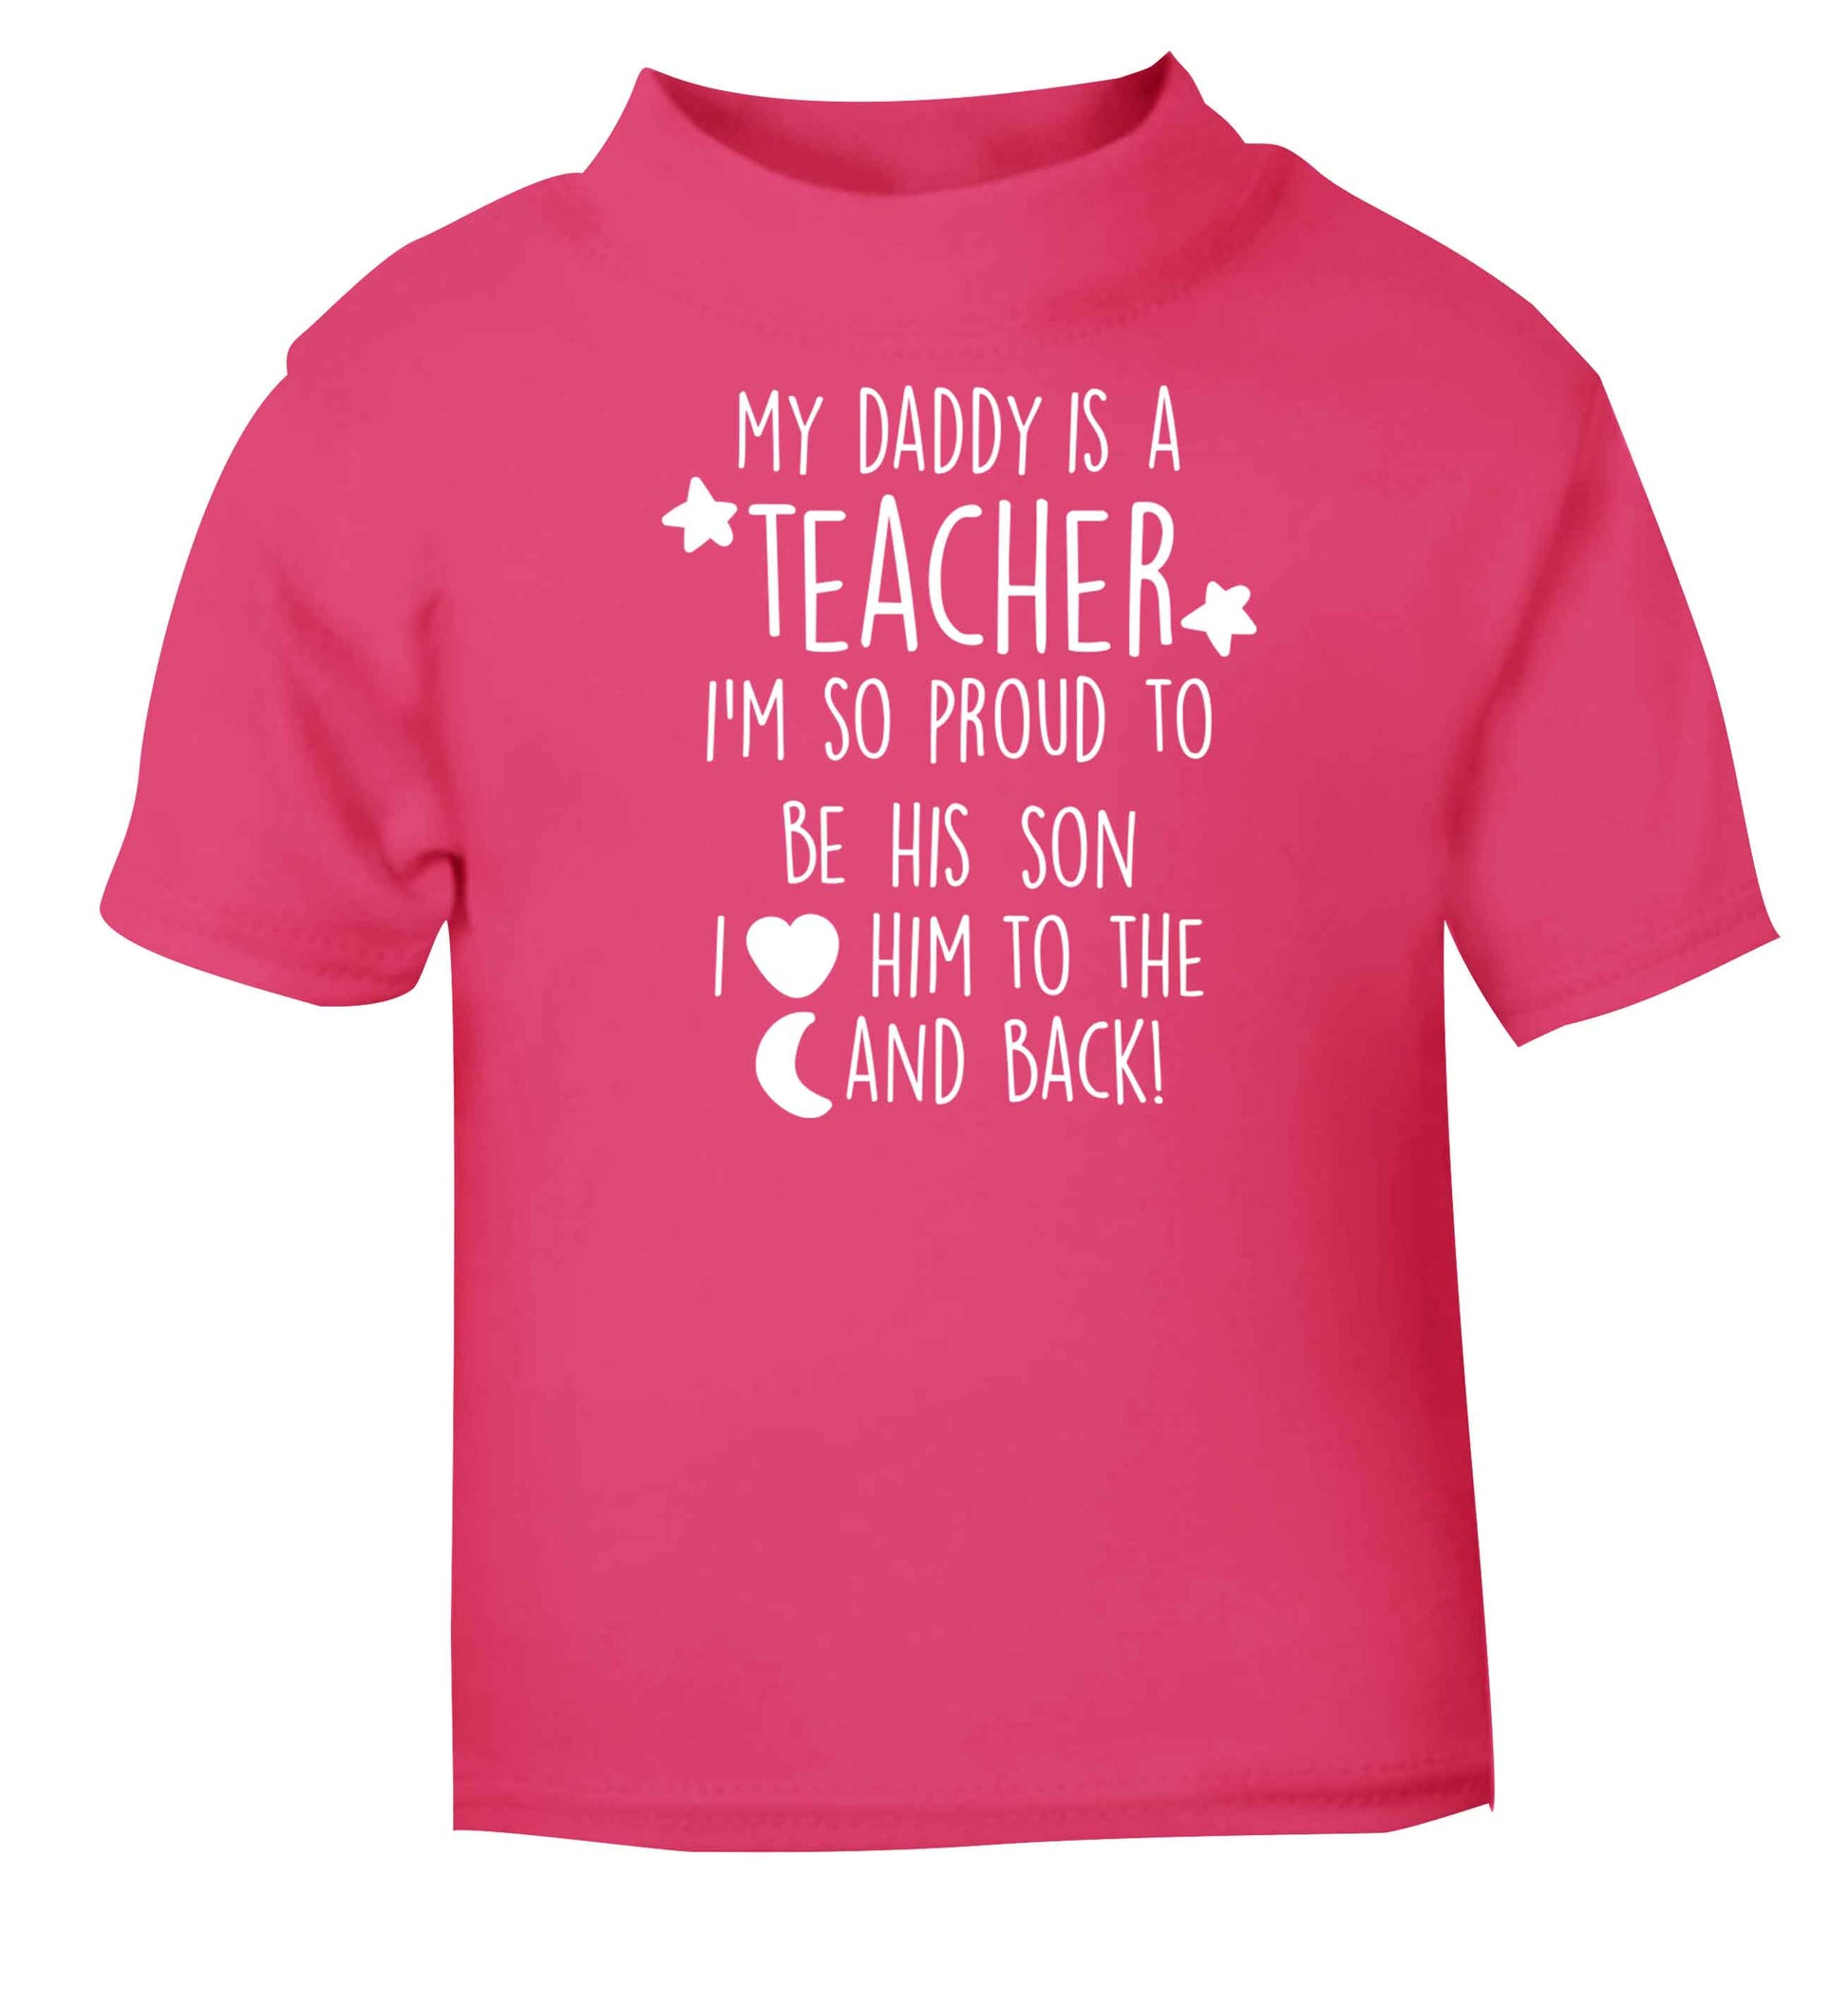 My daddy is a teacher I'm so proud to be his son I love her to the moon and back pink baby toddler Tshirt 2 Years